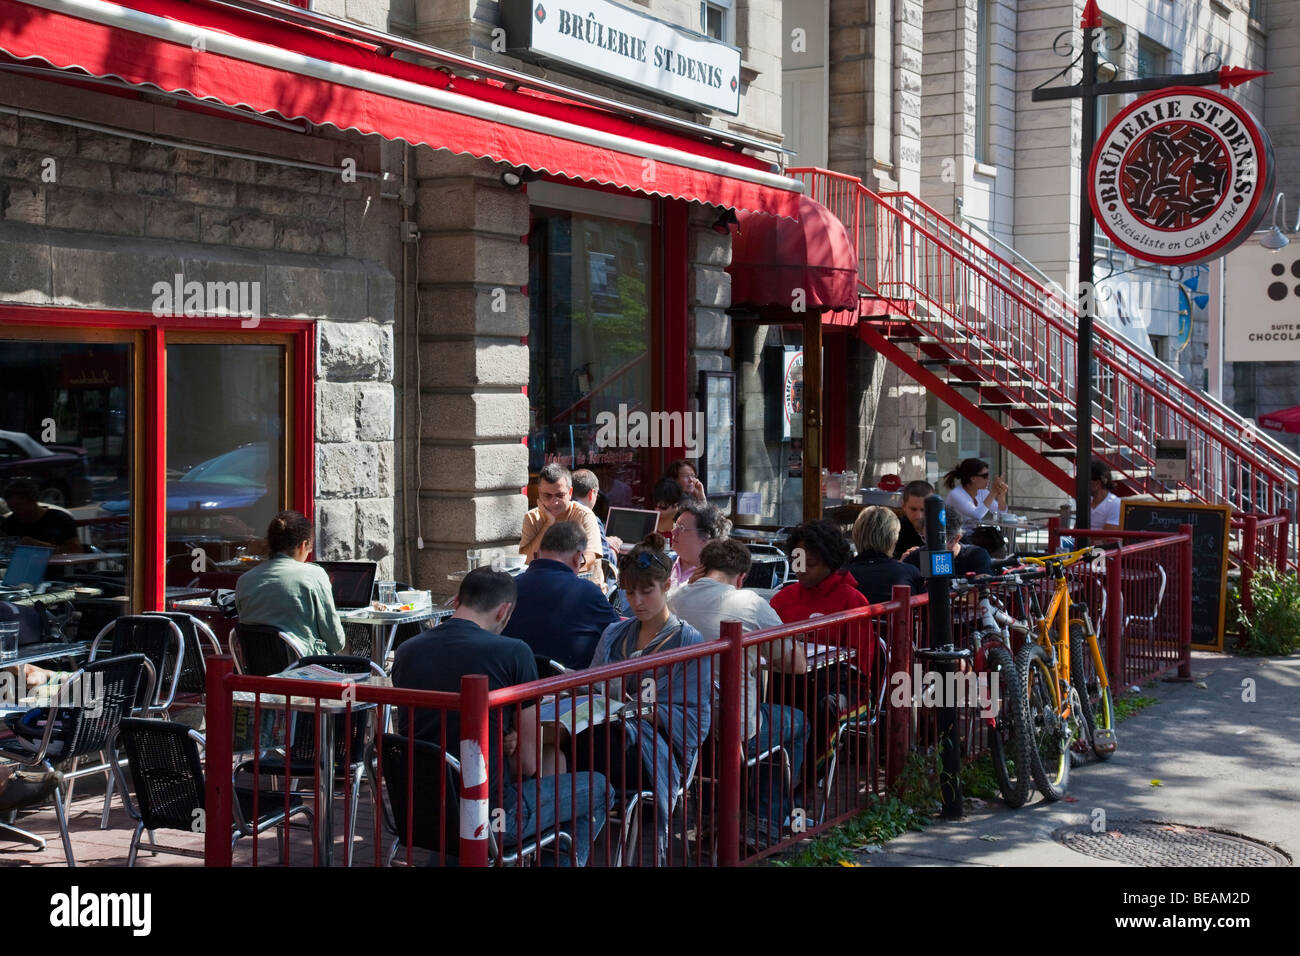 Cafe on Rue St Dennis in Montreal Canada Stock Photo